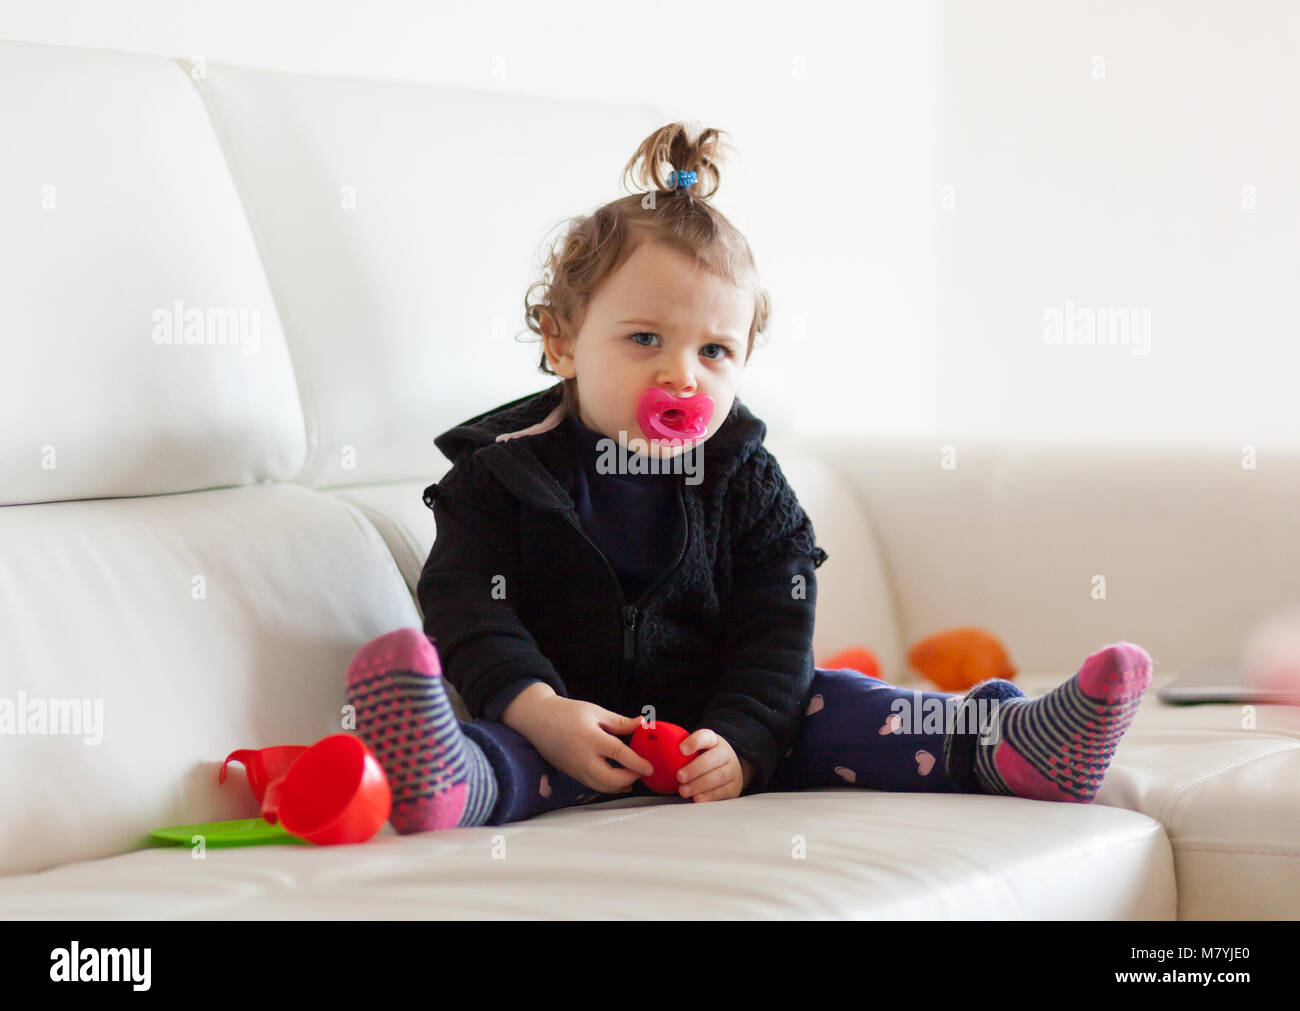 Portrait of cute toddler baby girl playing on the sofa. Stock Photo